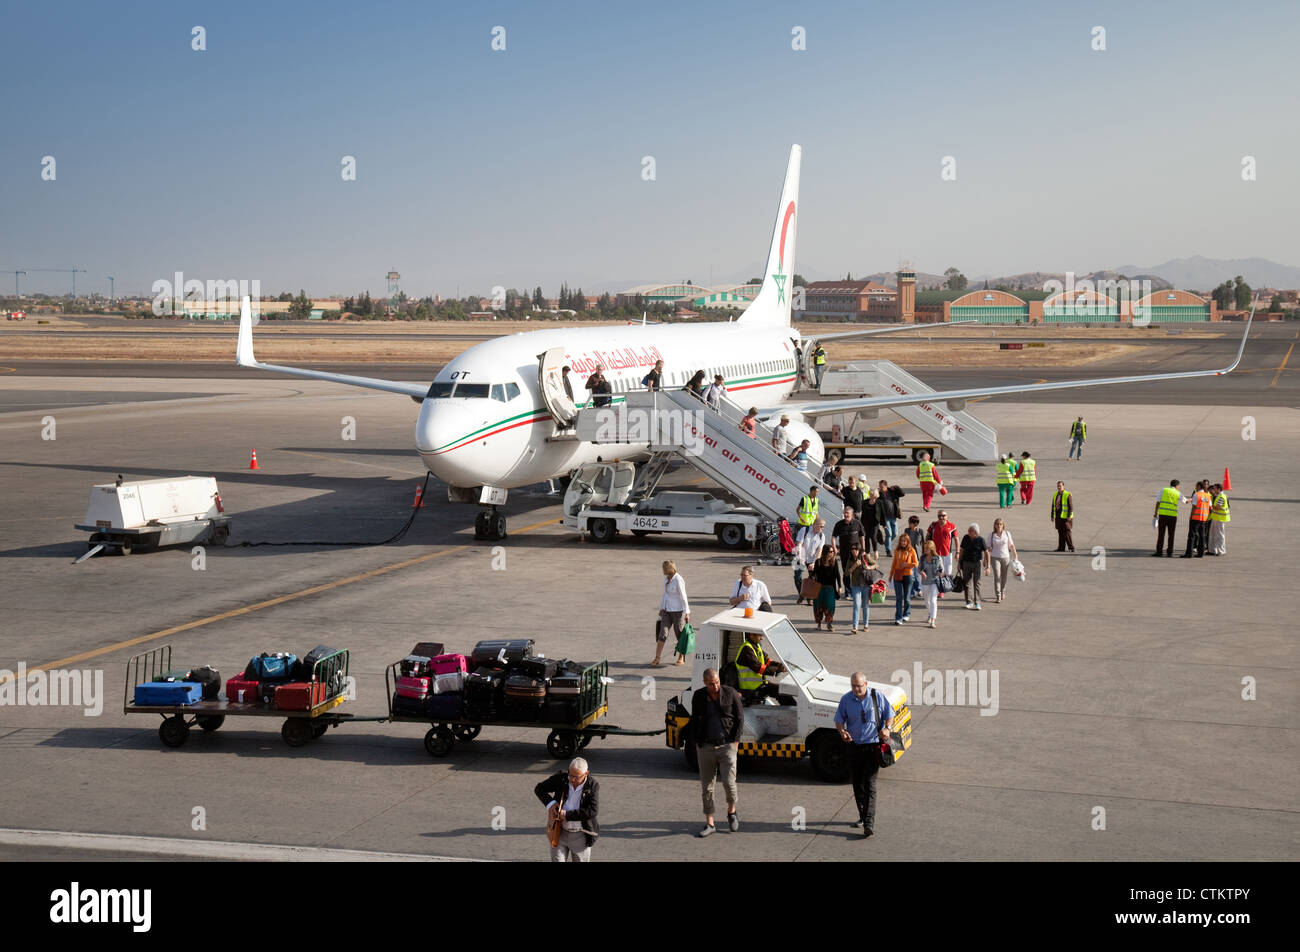 Royal Air Maroc plane on the ground at Marrakech airport, Morocco Africa Stock Photo